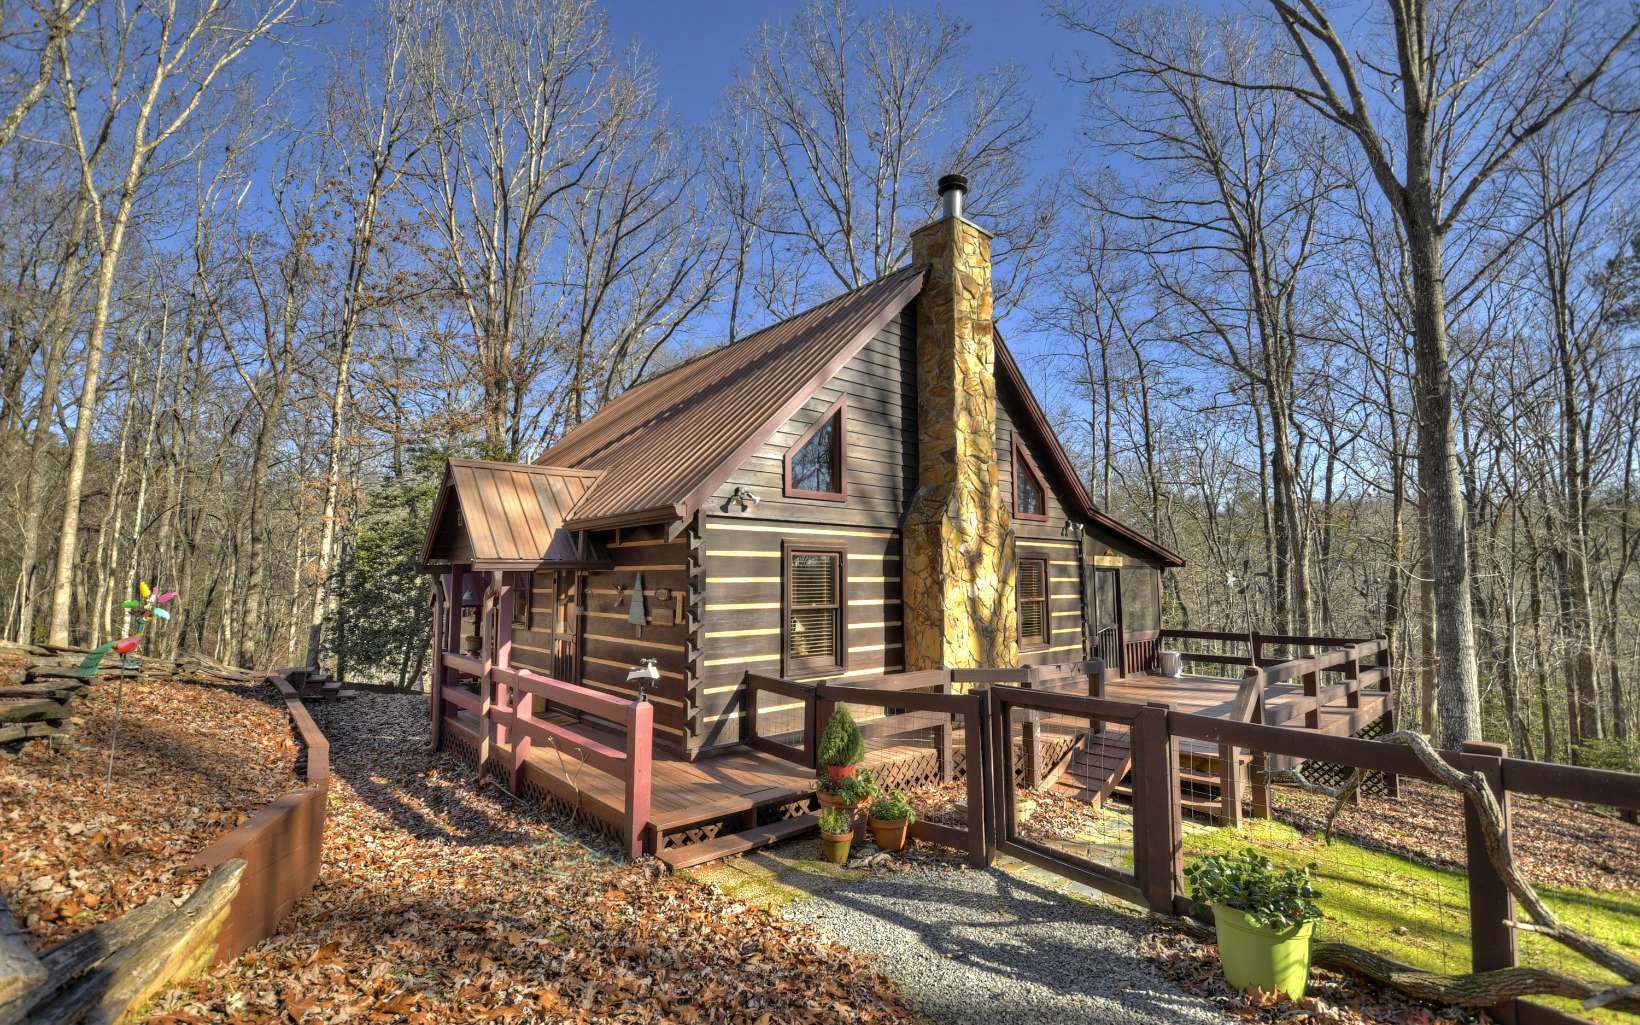 Welcome to your storybook mountain cabin. Classic, dovetail log cabin nestled on 6 nature-filled acres, this is a genuine Goldilocks special – not too big or little but just right! Cozy & comfortable at just under 1200 sf, the cabin features: well-designed 2BR/2BA, easy to expand floor plan; mellowed wood interior & hardwood floors; dramatic open-beam cath. ceil.; wood-burning fp for snug winter days; ceiling fans for refreshing summer breezes; spacious screen porch for indoor-outdoor living. Outside is an oasis of carefree naturescaping; generous decks & campfire for entertaining; fenced area; detached 2-car gar. for vehicles, storage, workshop, studio, game rm or other creative uses. 6+ ac. consist of 3 adjoining 2-acre lots w/ cabin at center. Adjacent lots offer potential for expansion or development. Whether a picturesque vacation getaway, short-term rental property or yr-round retreat, your storybook mtn cabin awaits.